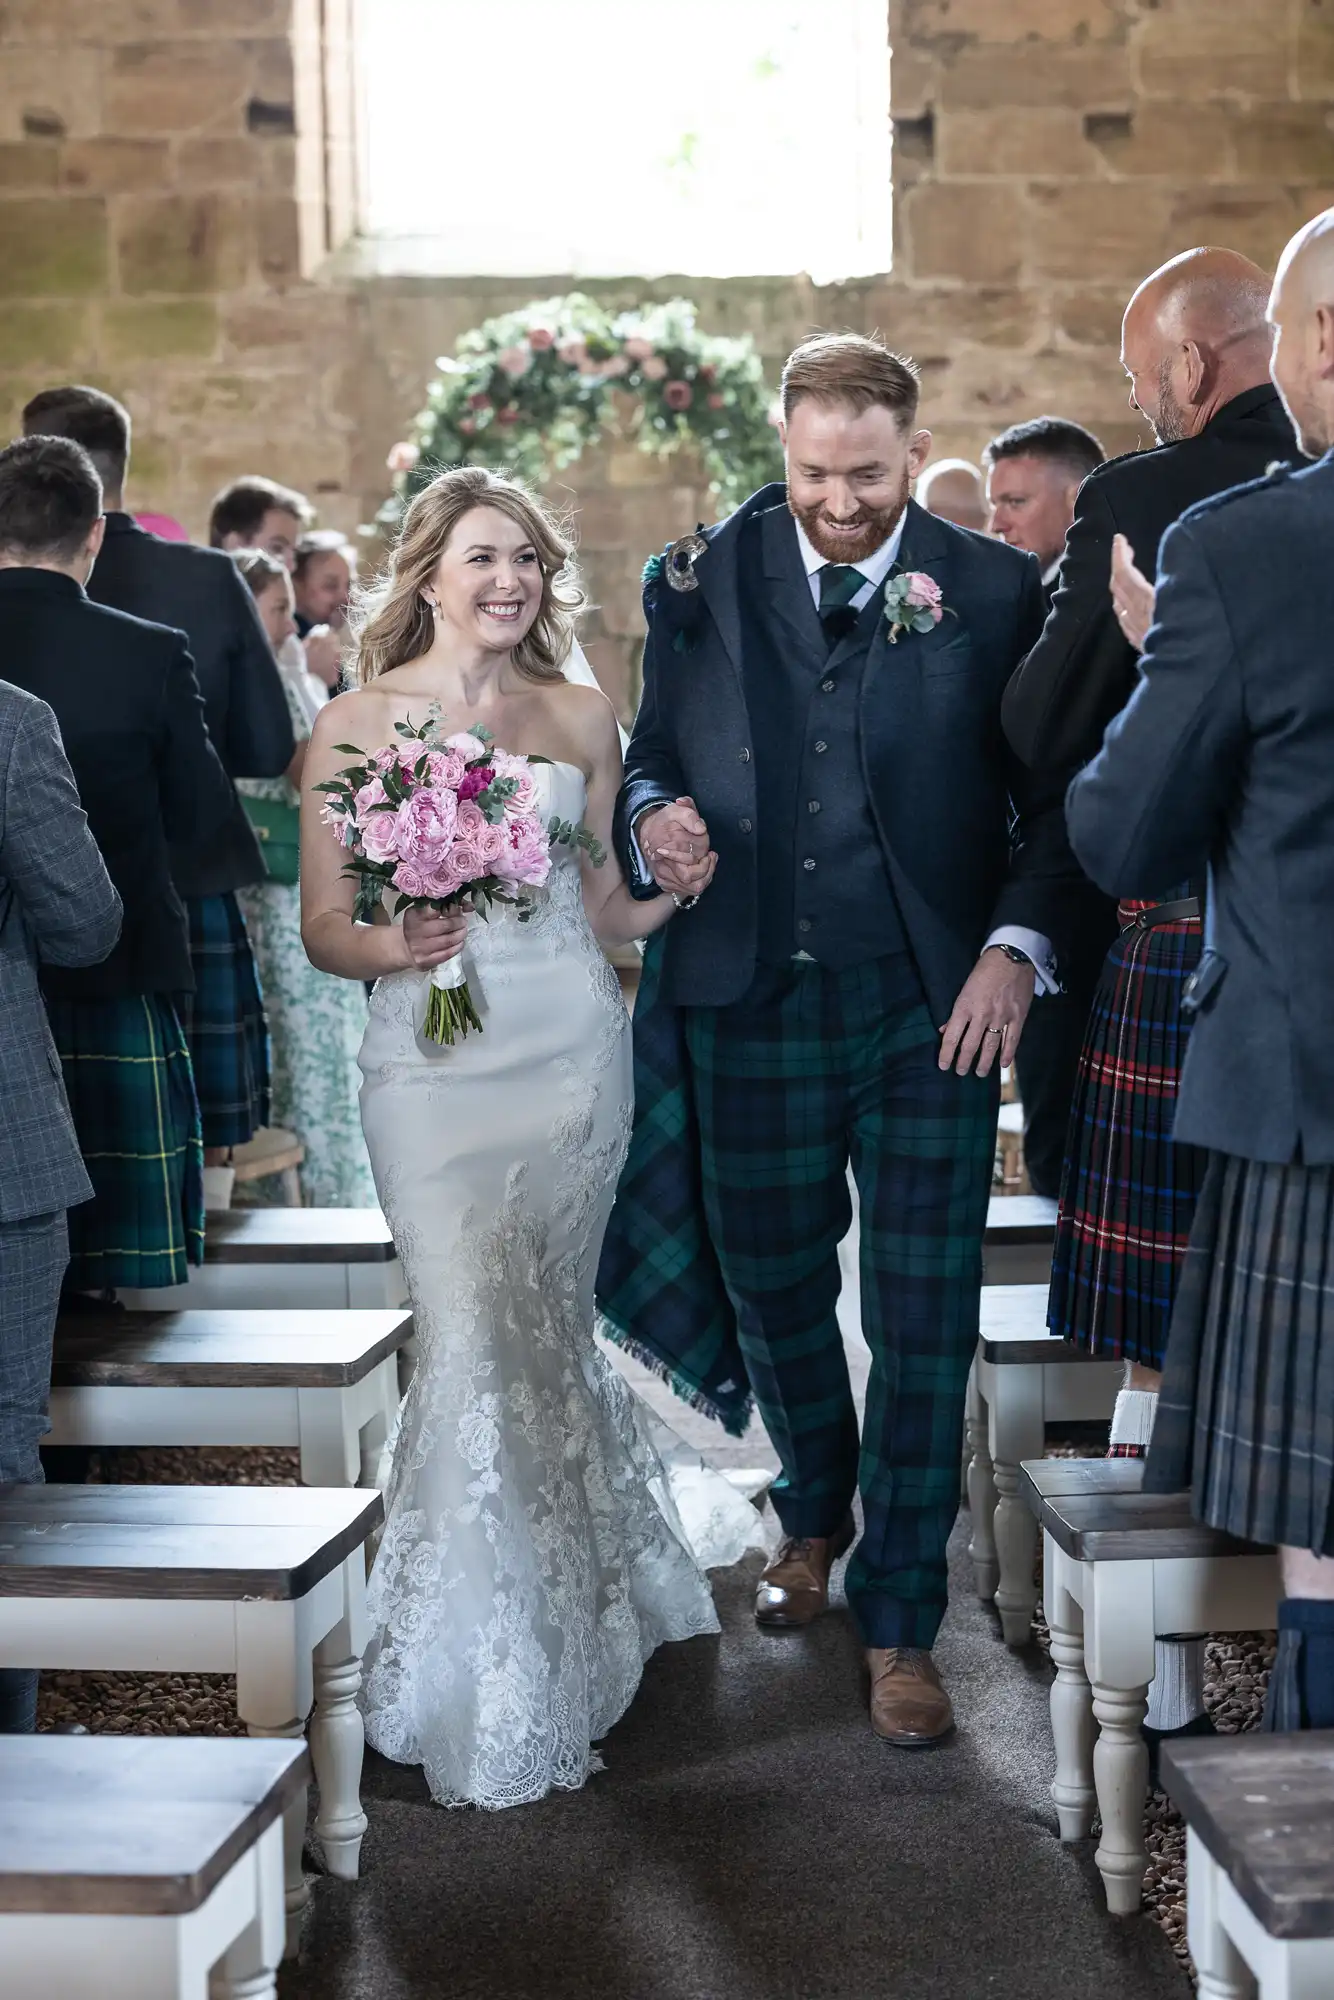 A bride and groom walk down the aisle, smiling, surrounded by guests; the groom wears a tartan kilt and the bride holds a bouquet.